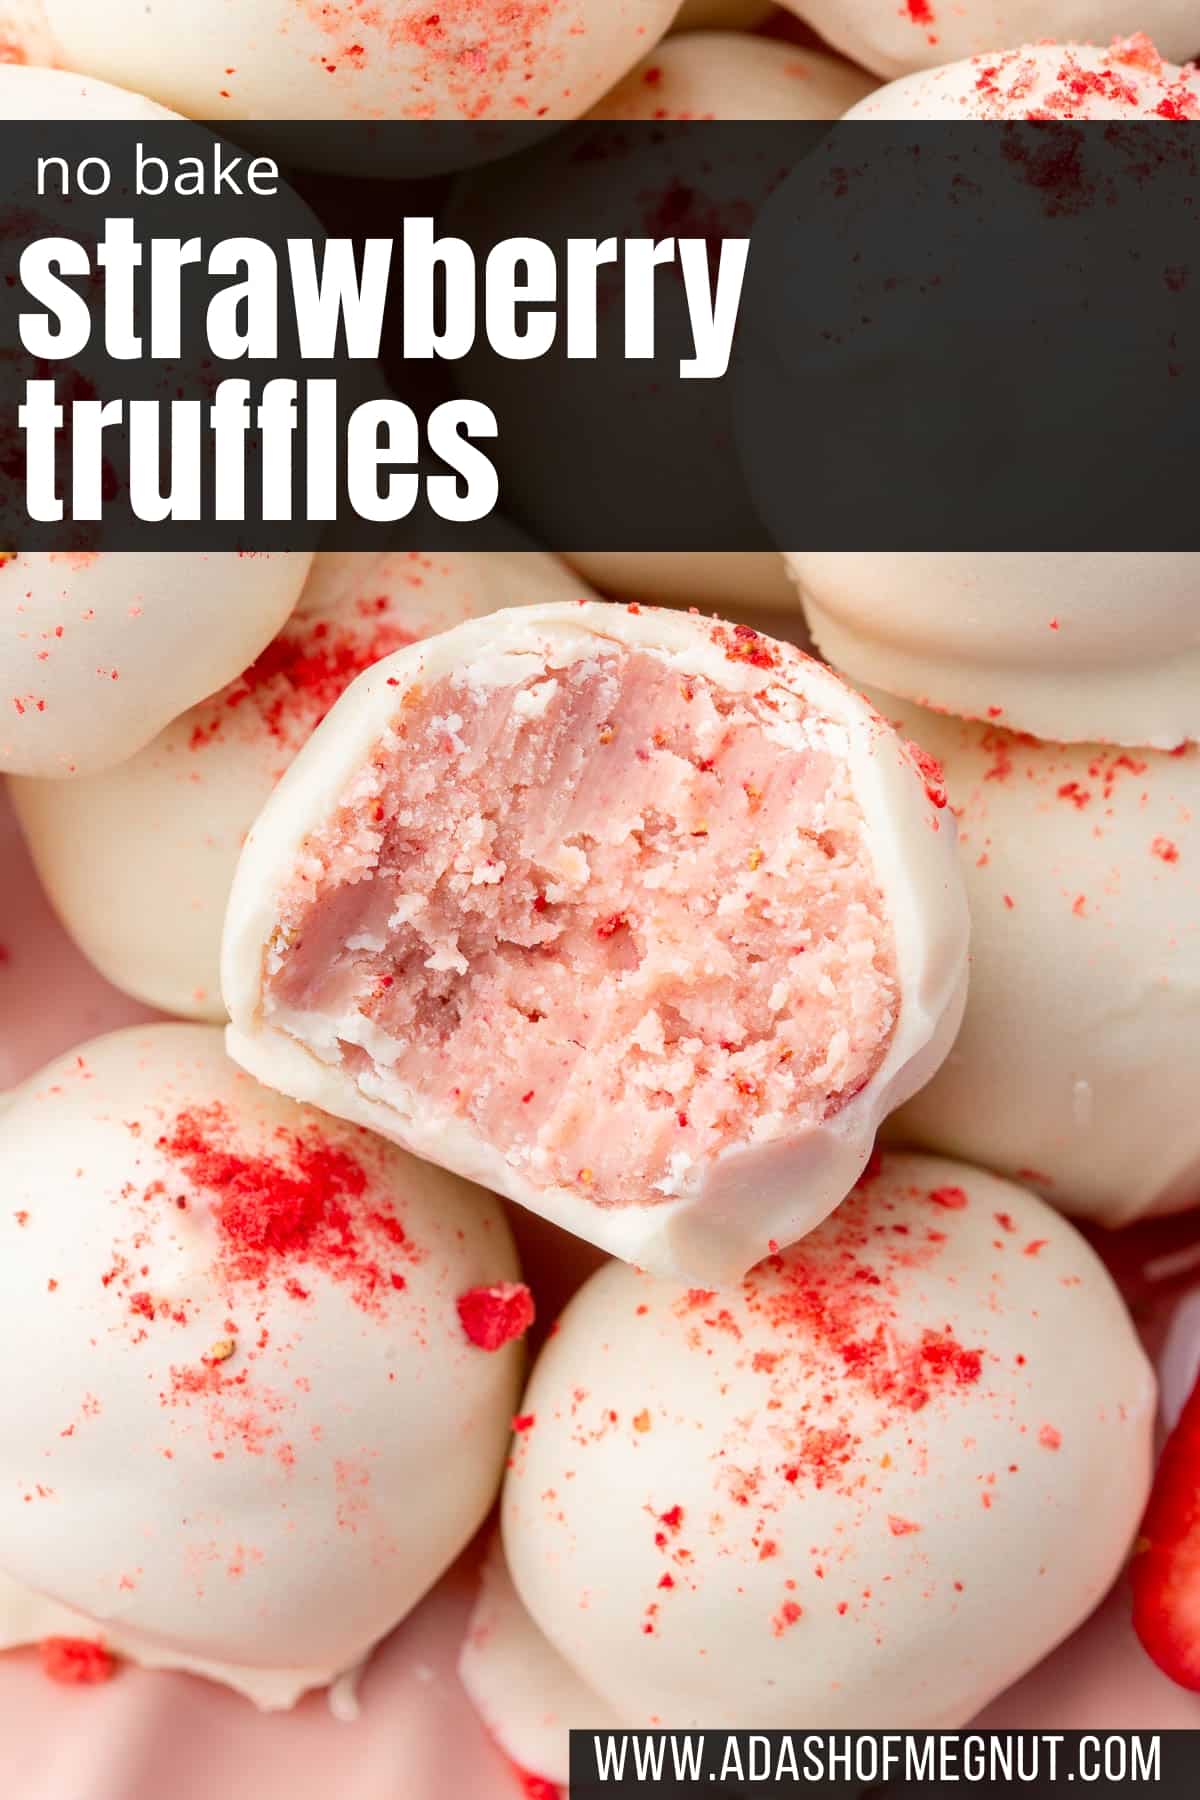 A close up of a strawberry truffle with a bite taken out of it on a pile of more white chocolate strawberry truffles.